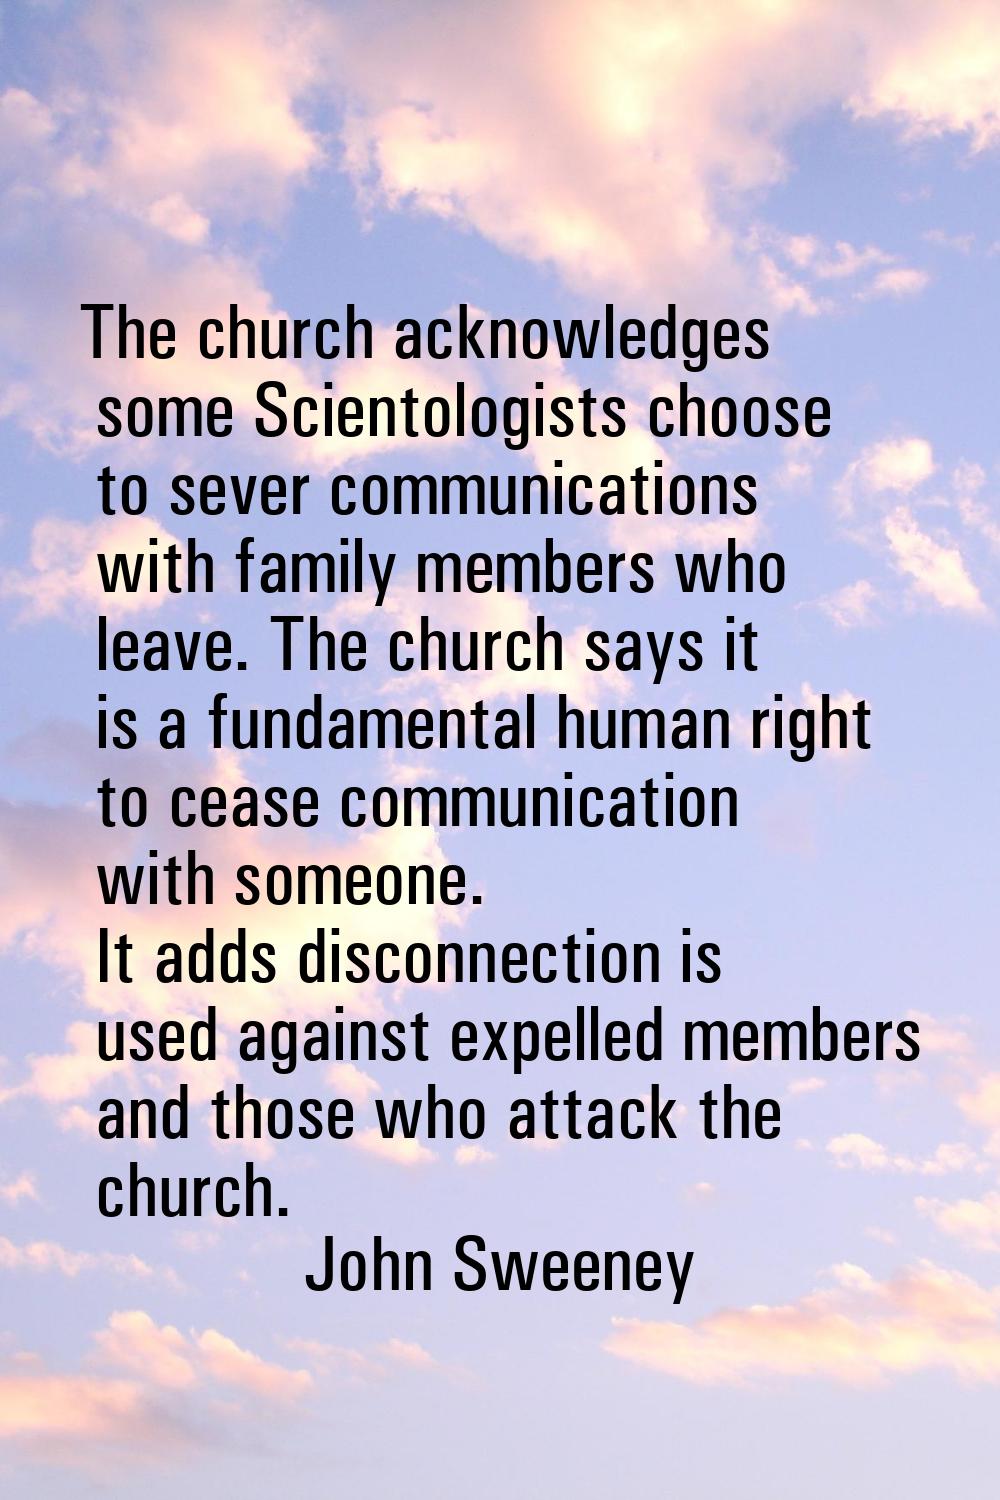 The church acknowledges some Scientologists choose to sever communications with family members who 